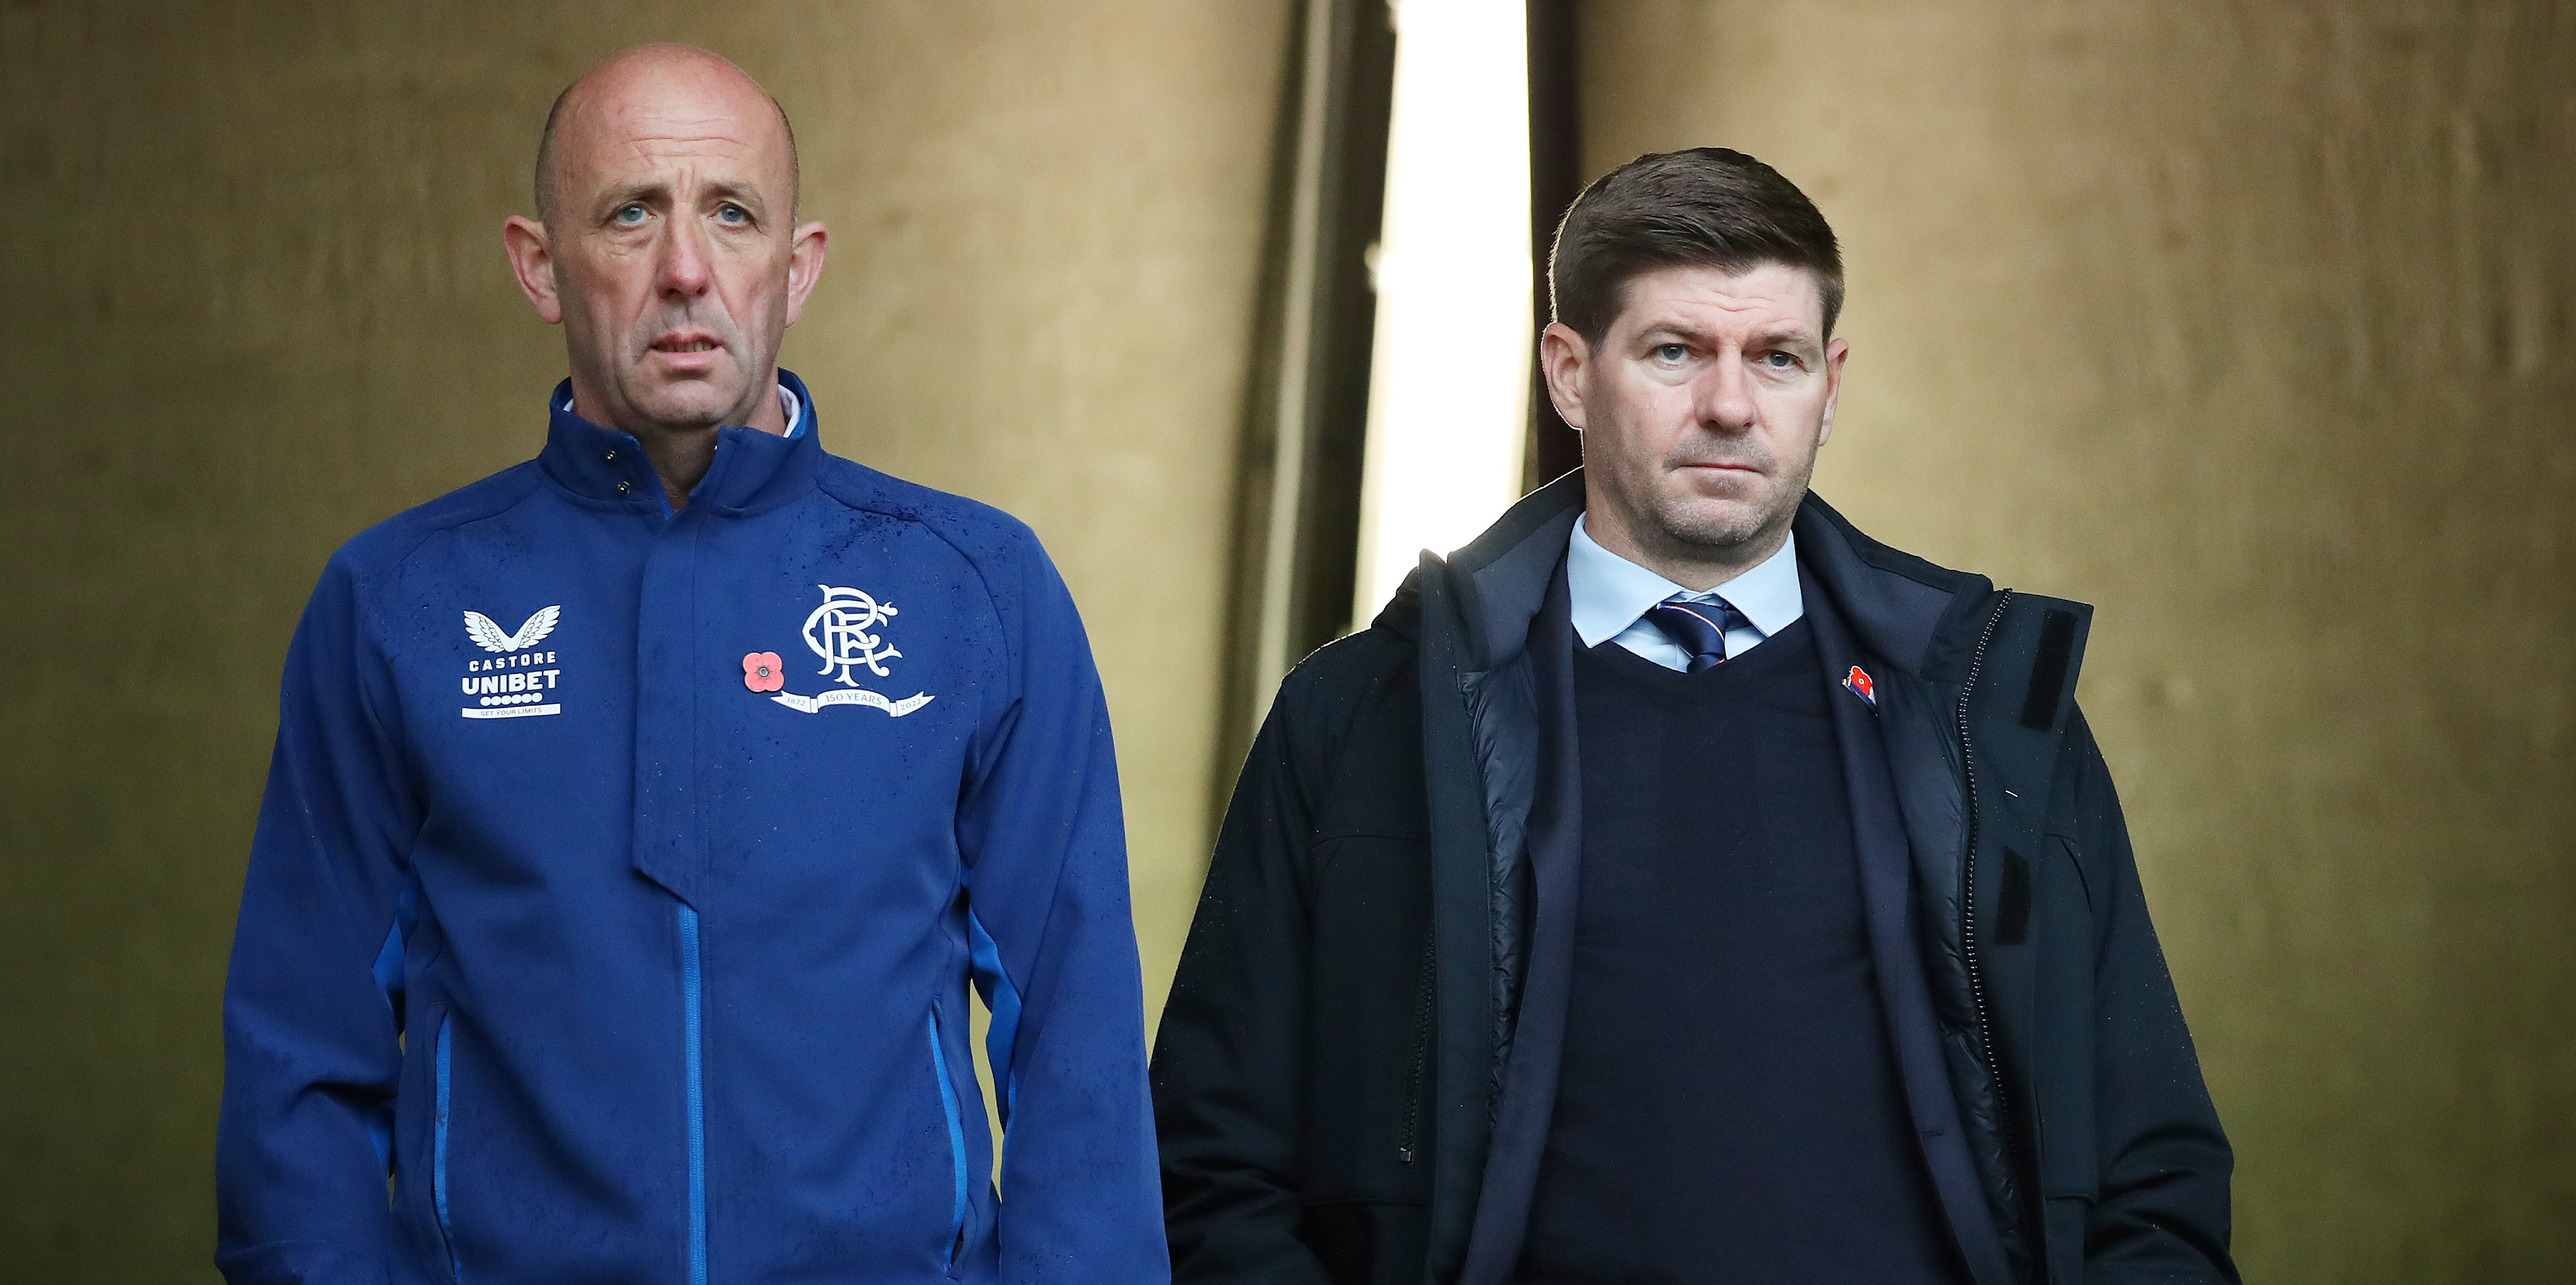 ‘Expected’ length of Steven Gerrard’s Aston Villa deal reported by Sky Sports